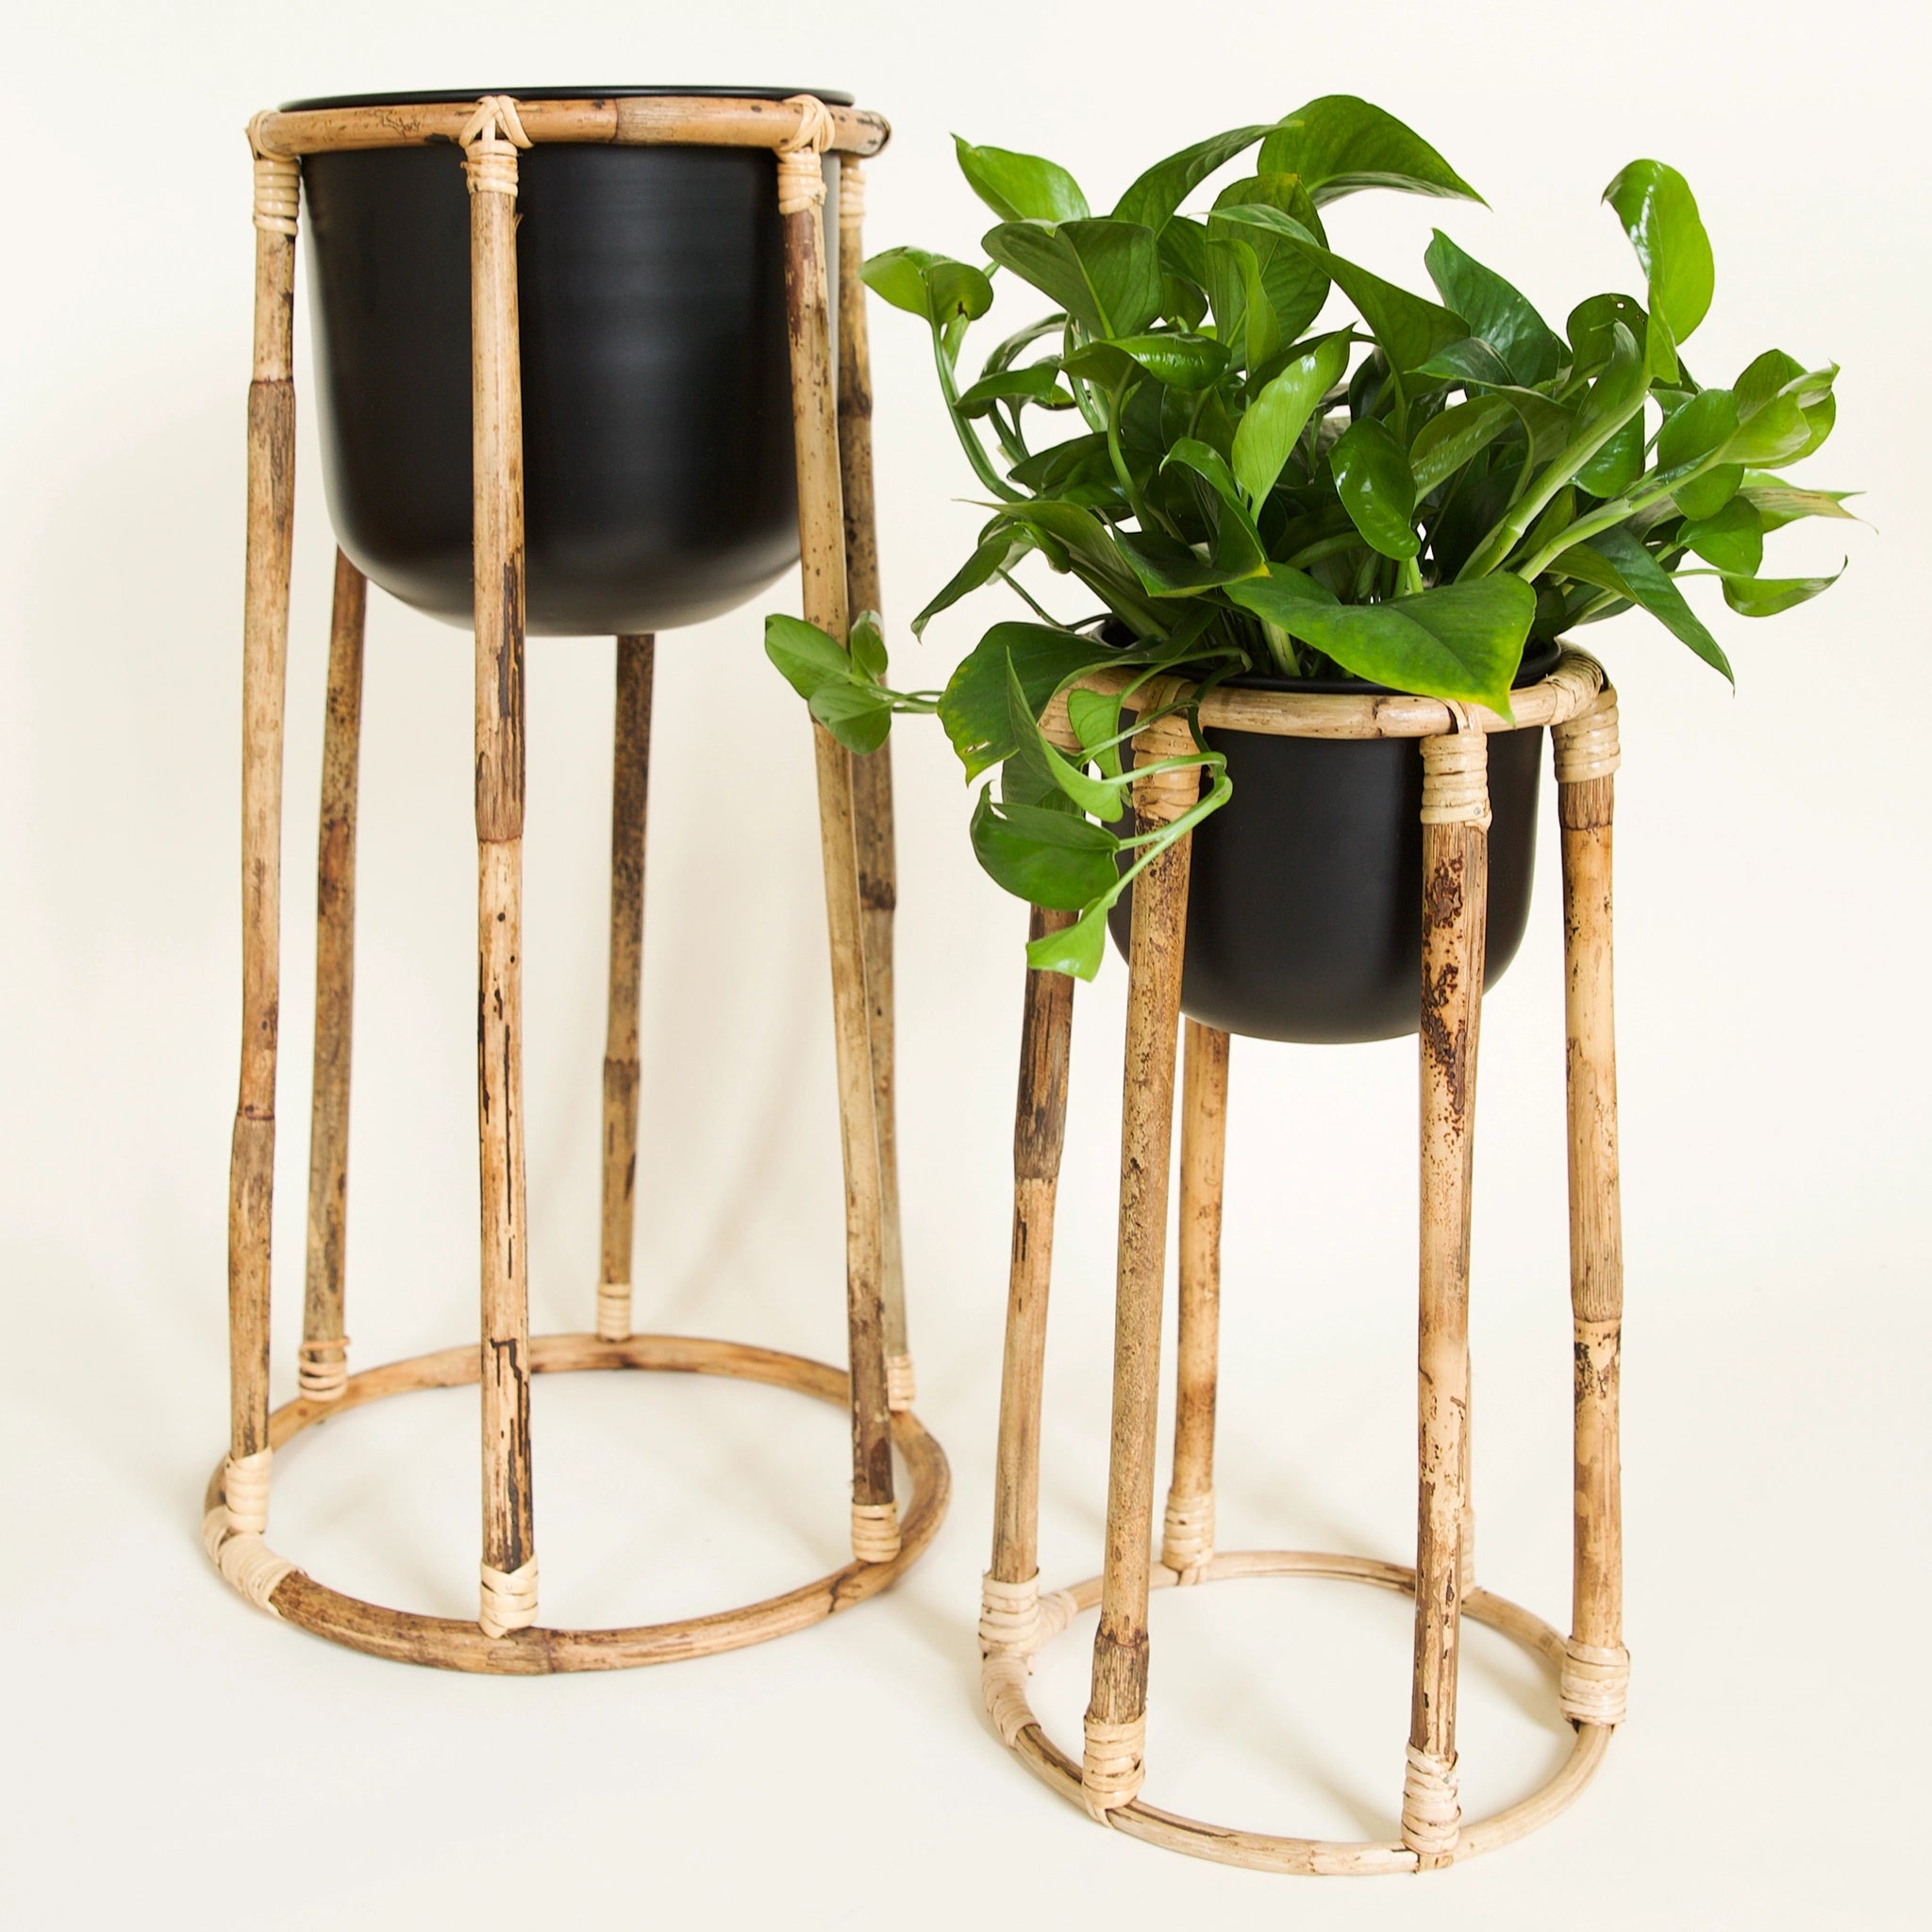 Two rattan plant stands on a white background. One taller on the left and one shorter on the right. Stands have circular bases and taper slightly at the top. Both plant stands have black metal pots with rounded bases. The plant stand on the right has a green trailing Pothos plant inside with leaves hanging over the edge.